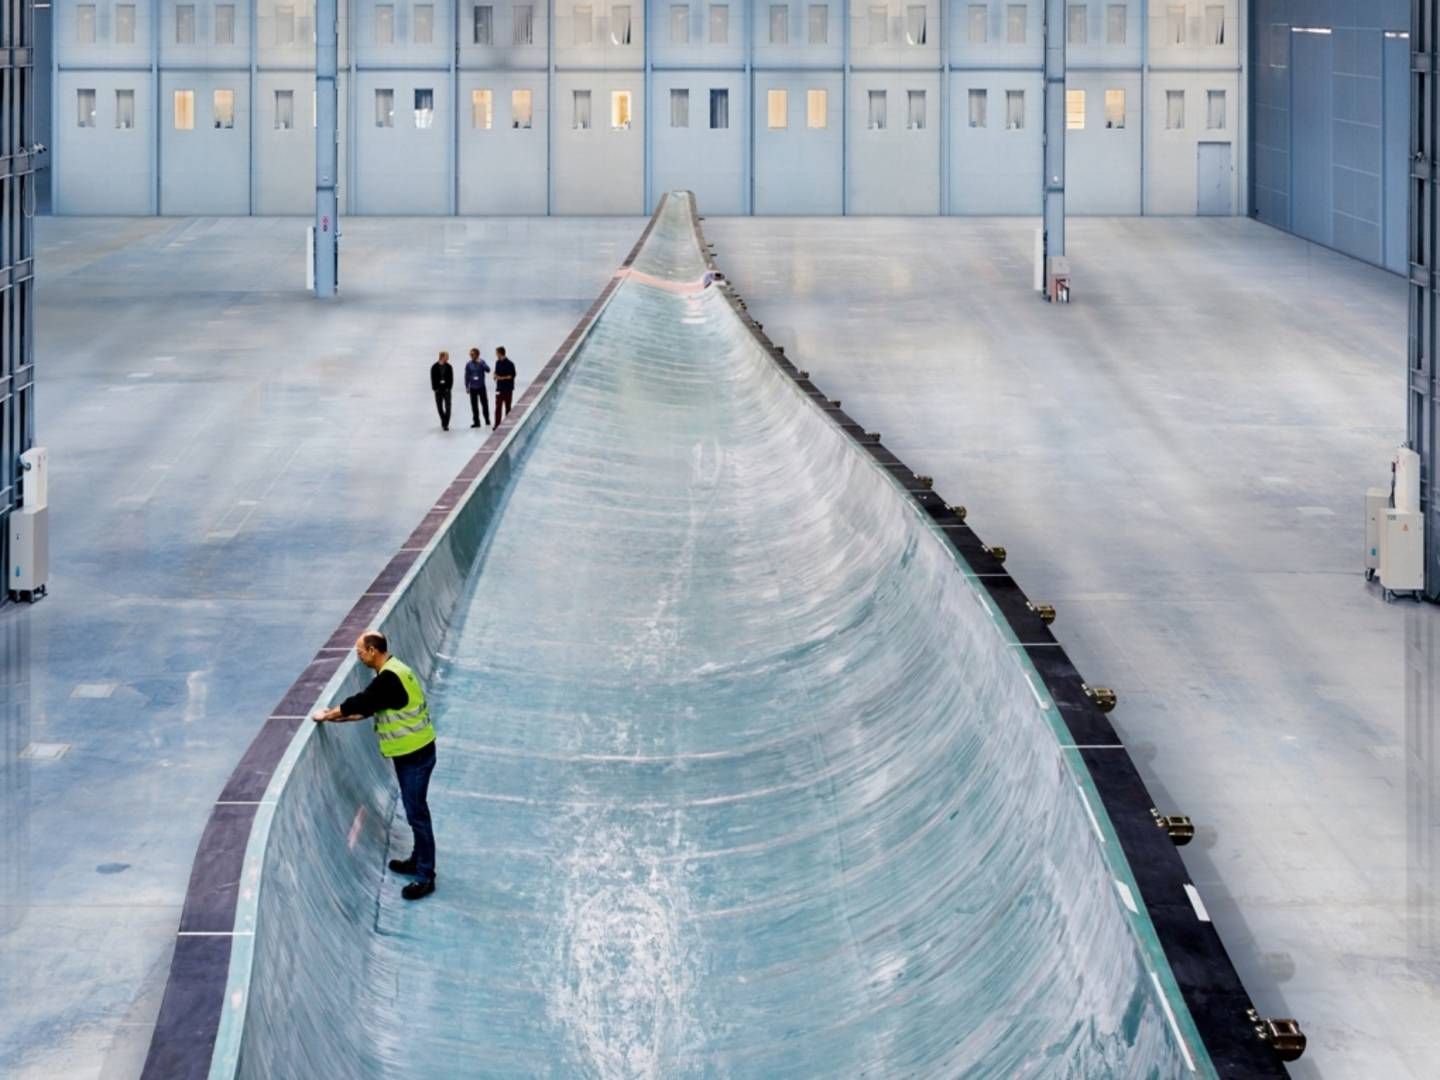 Steel and copper prices aren't the only commodities trading for higher prices. The same is true of materials like epoxy used in turbine blades. | Photo: Siemens Gamesa